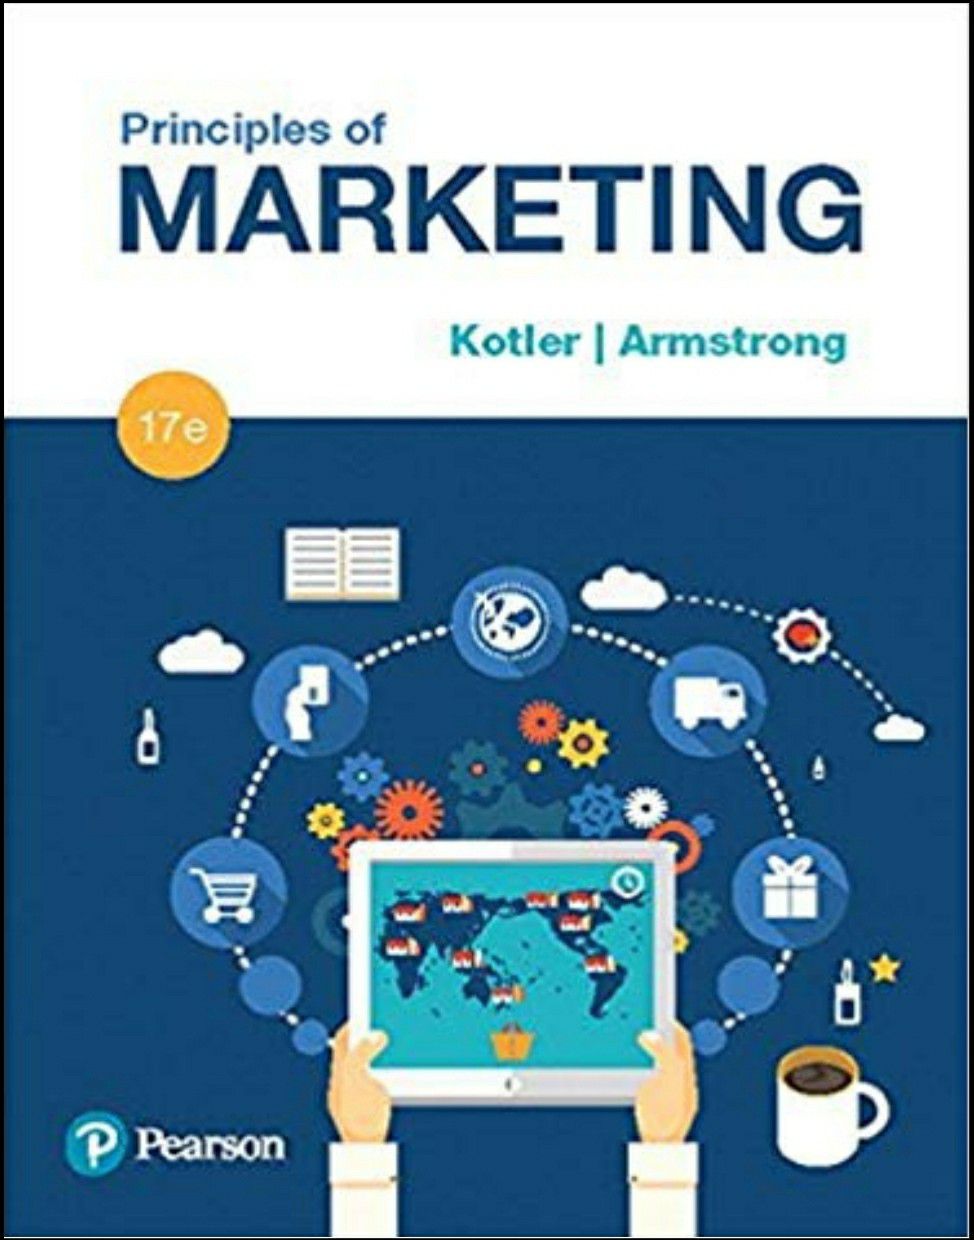 Principles of Marketing by Philip Kotler, Gary Armstrong 9780134492513 eBook PDF free instant delivery